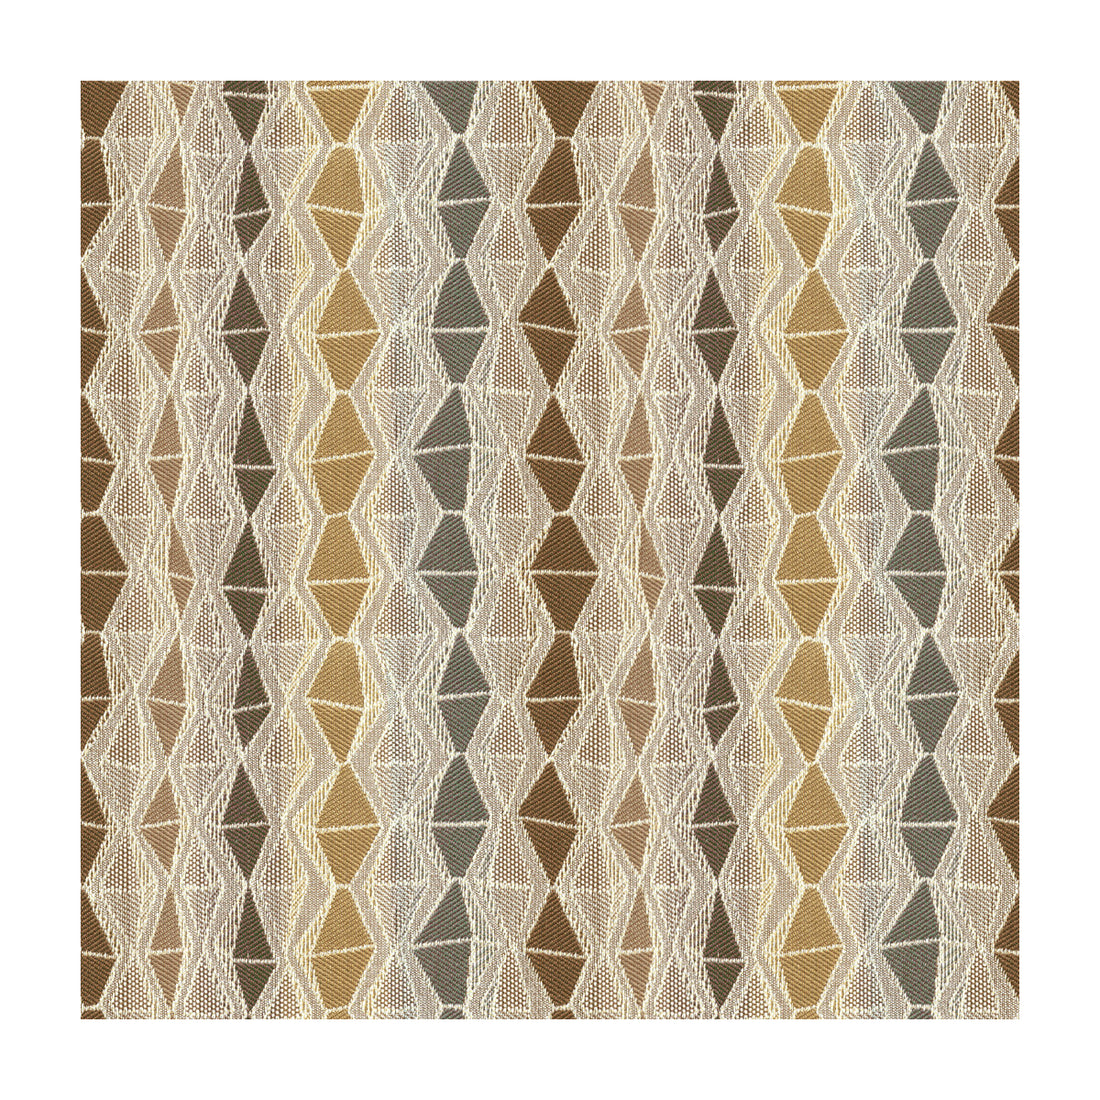 Kravet Design fabric in 33883-1611 color - pattern 33883.1611.0 - by Kravet Design in the Tanzania J Banks collection